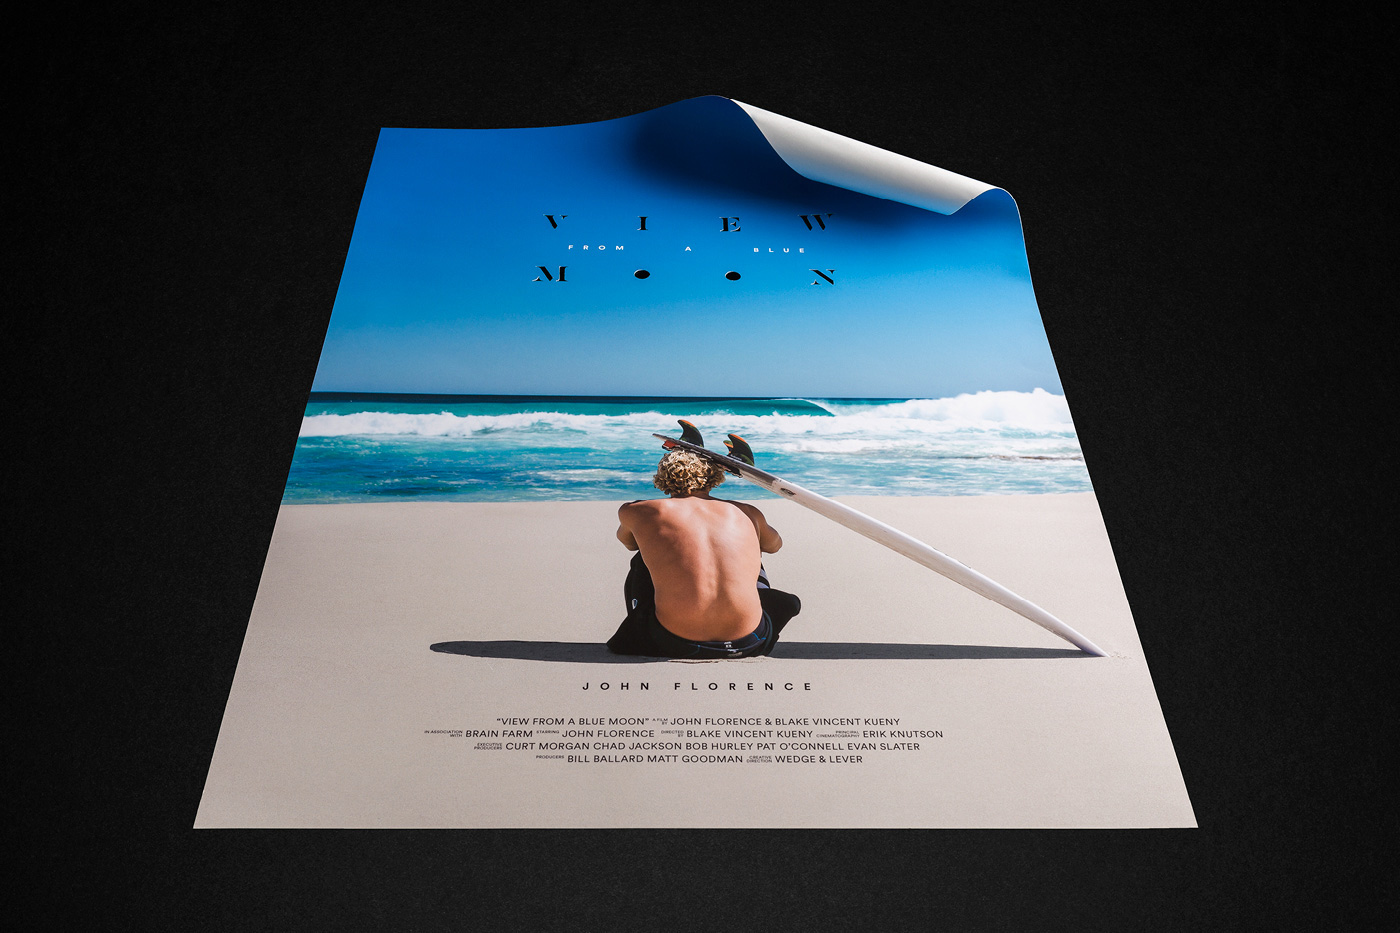 Wedge & Lever Wedge and Lever John John Florence John Florence surfing surfer surf film  Movie Posters movie design packaging design logo naming view from a blue moon VFABM